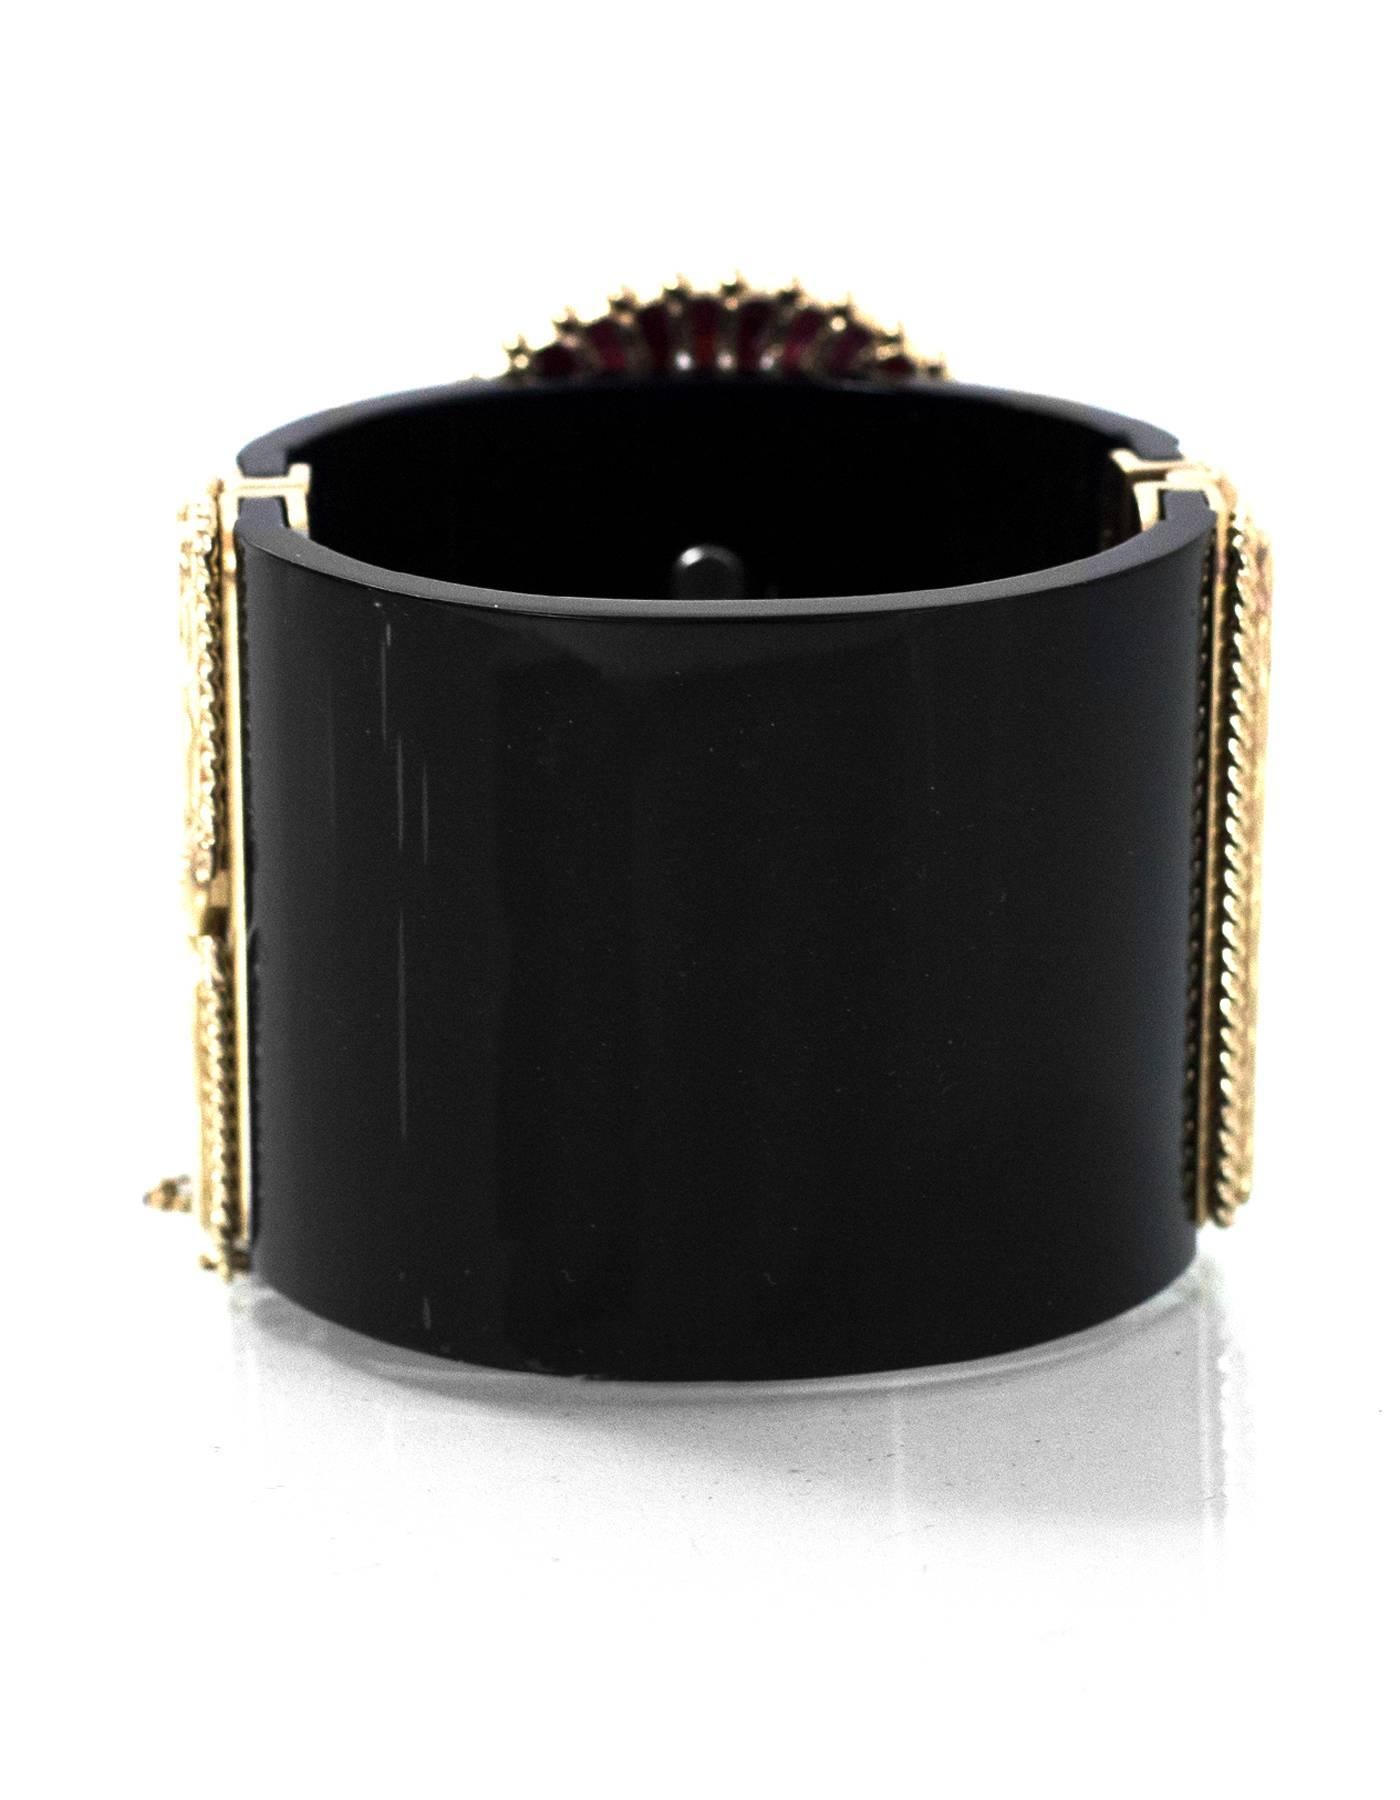 Chanel Black and Red Paris/Dallas 2014 Cuff Bracelet with Box 1